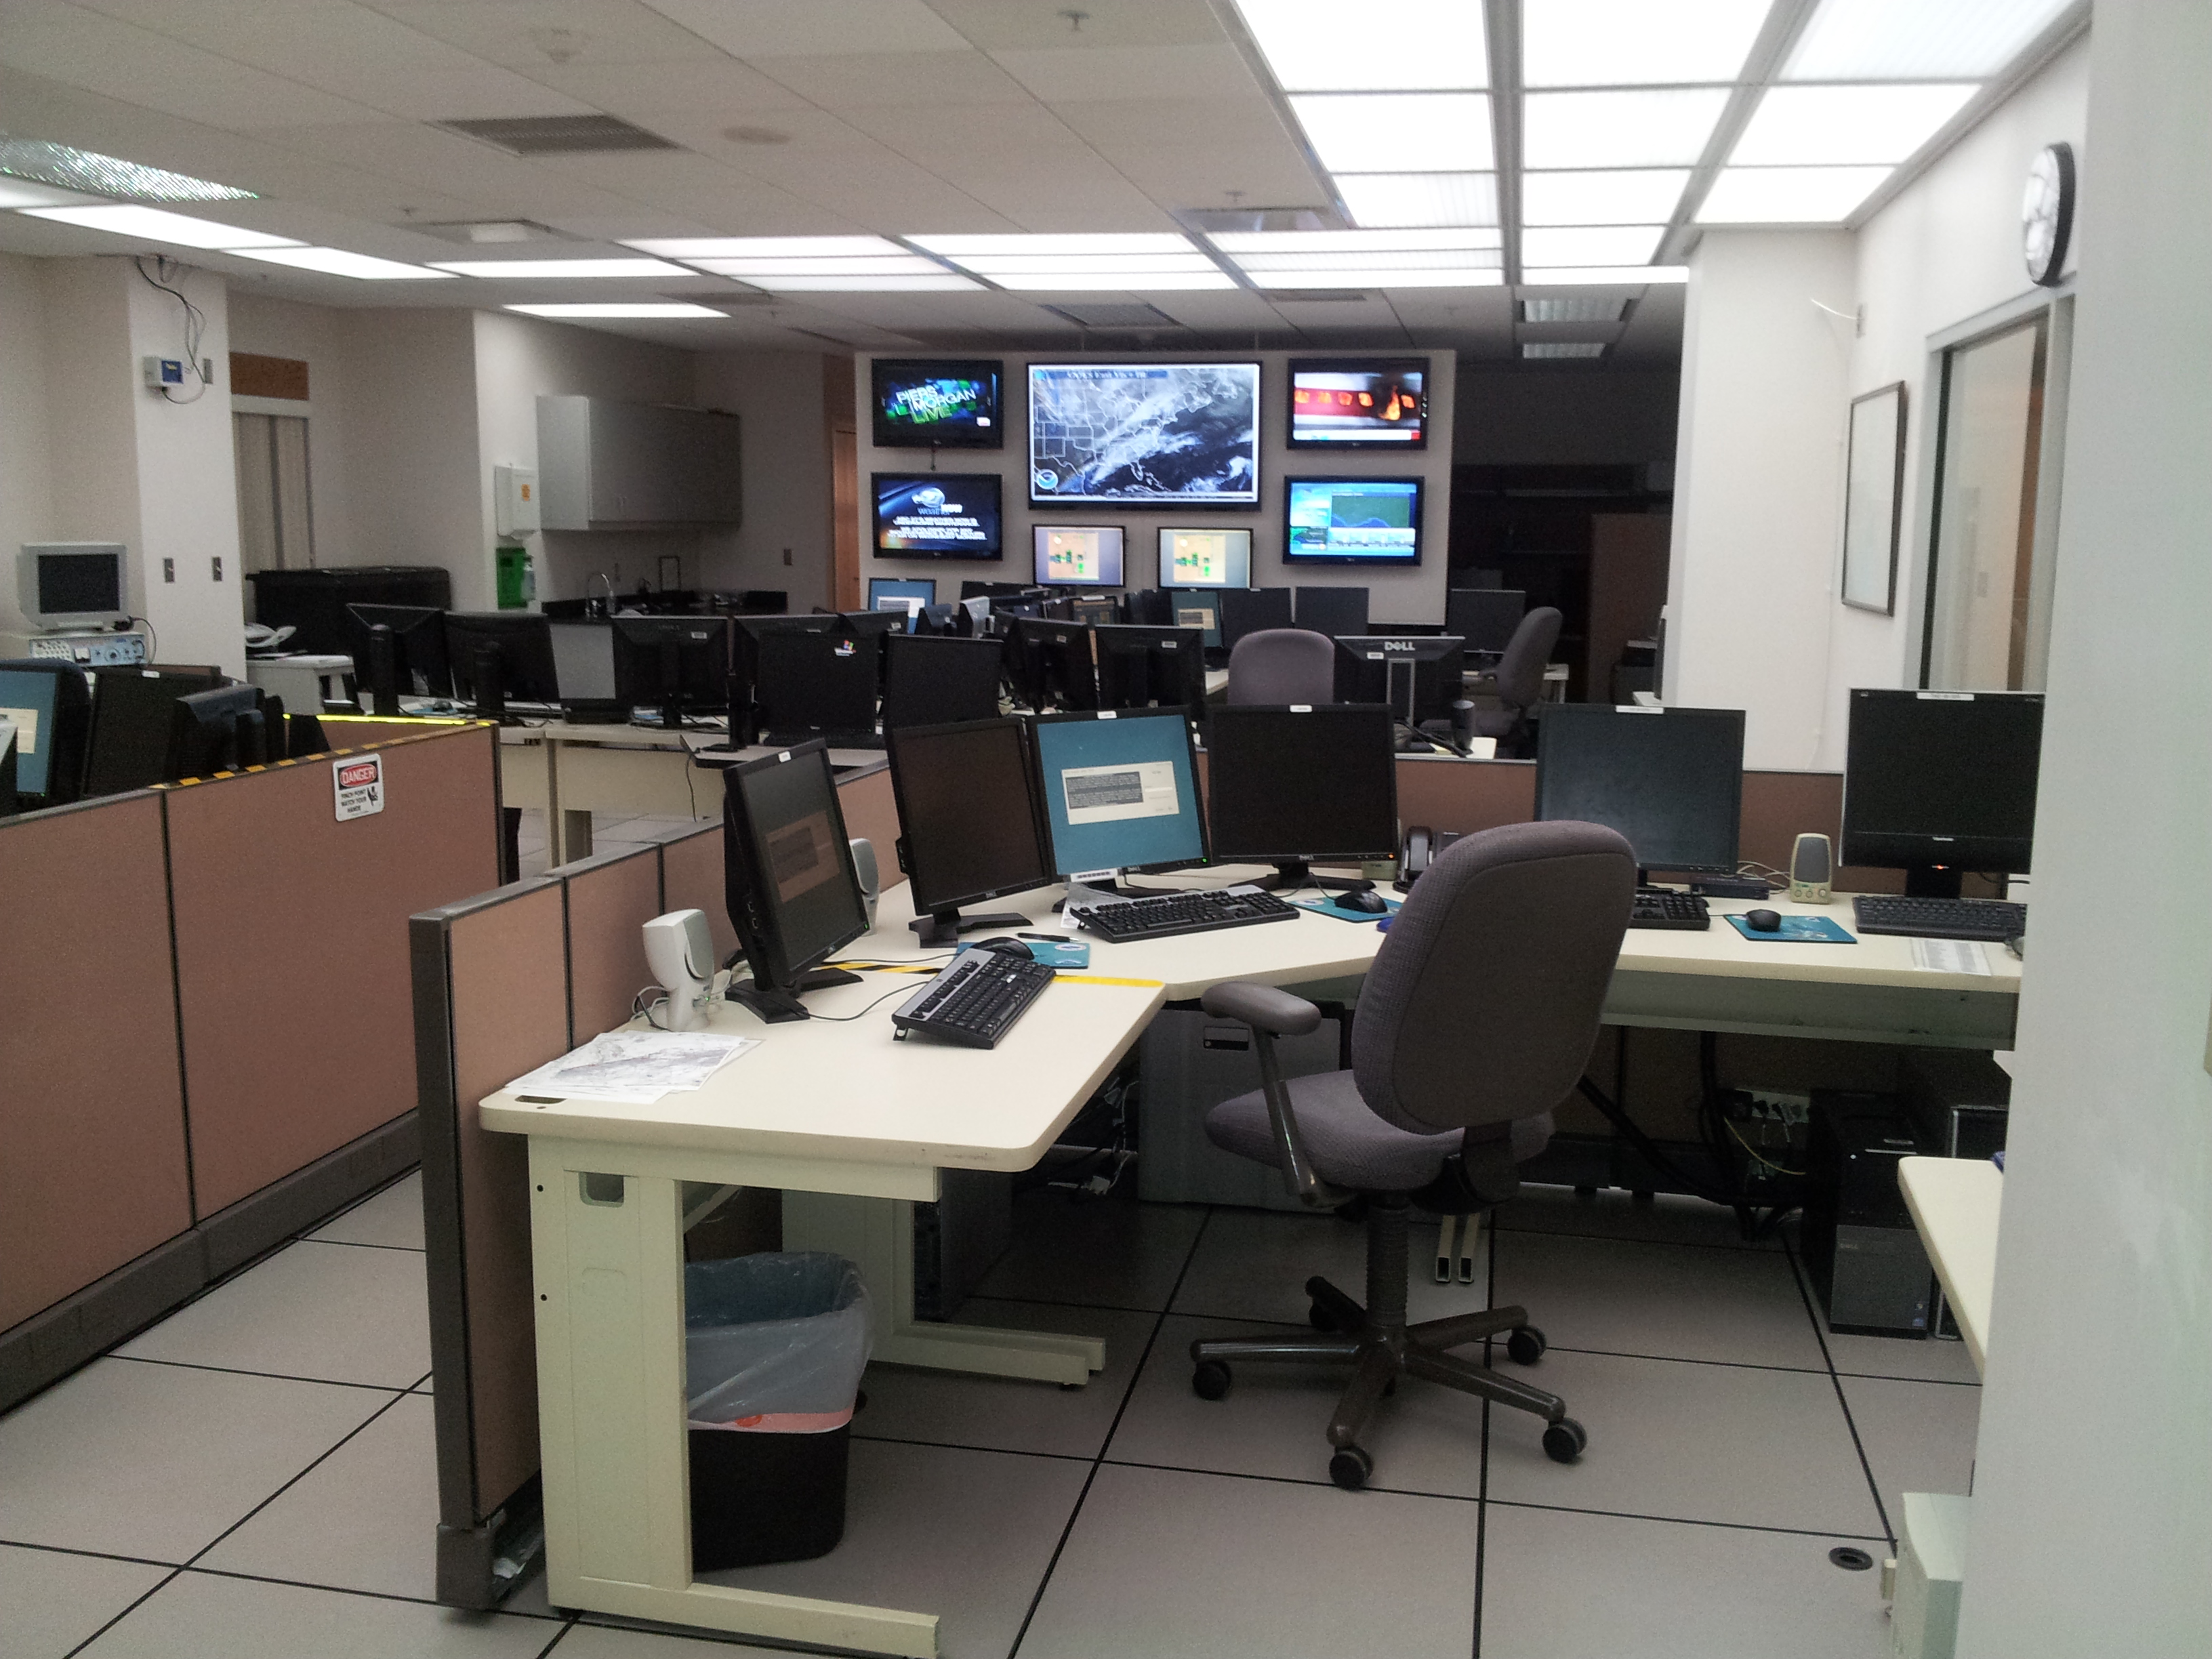 A photo of the main operations room in the forecast office.